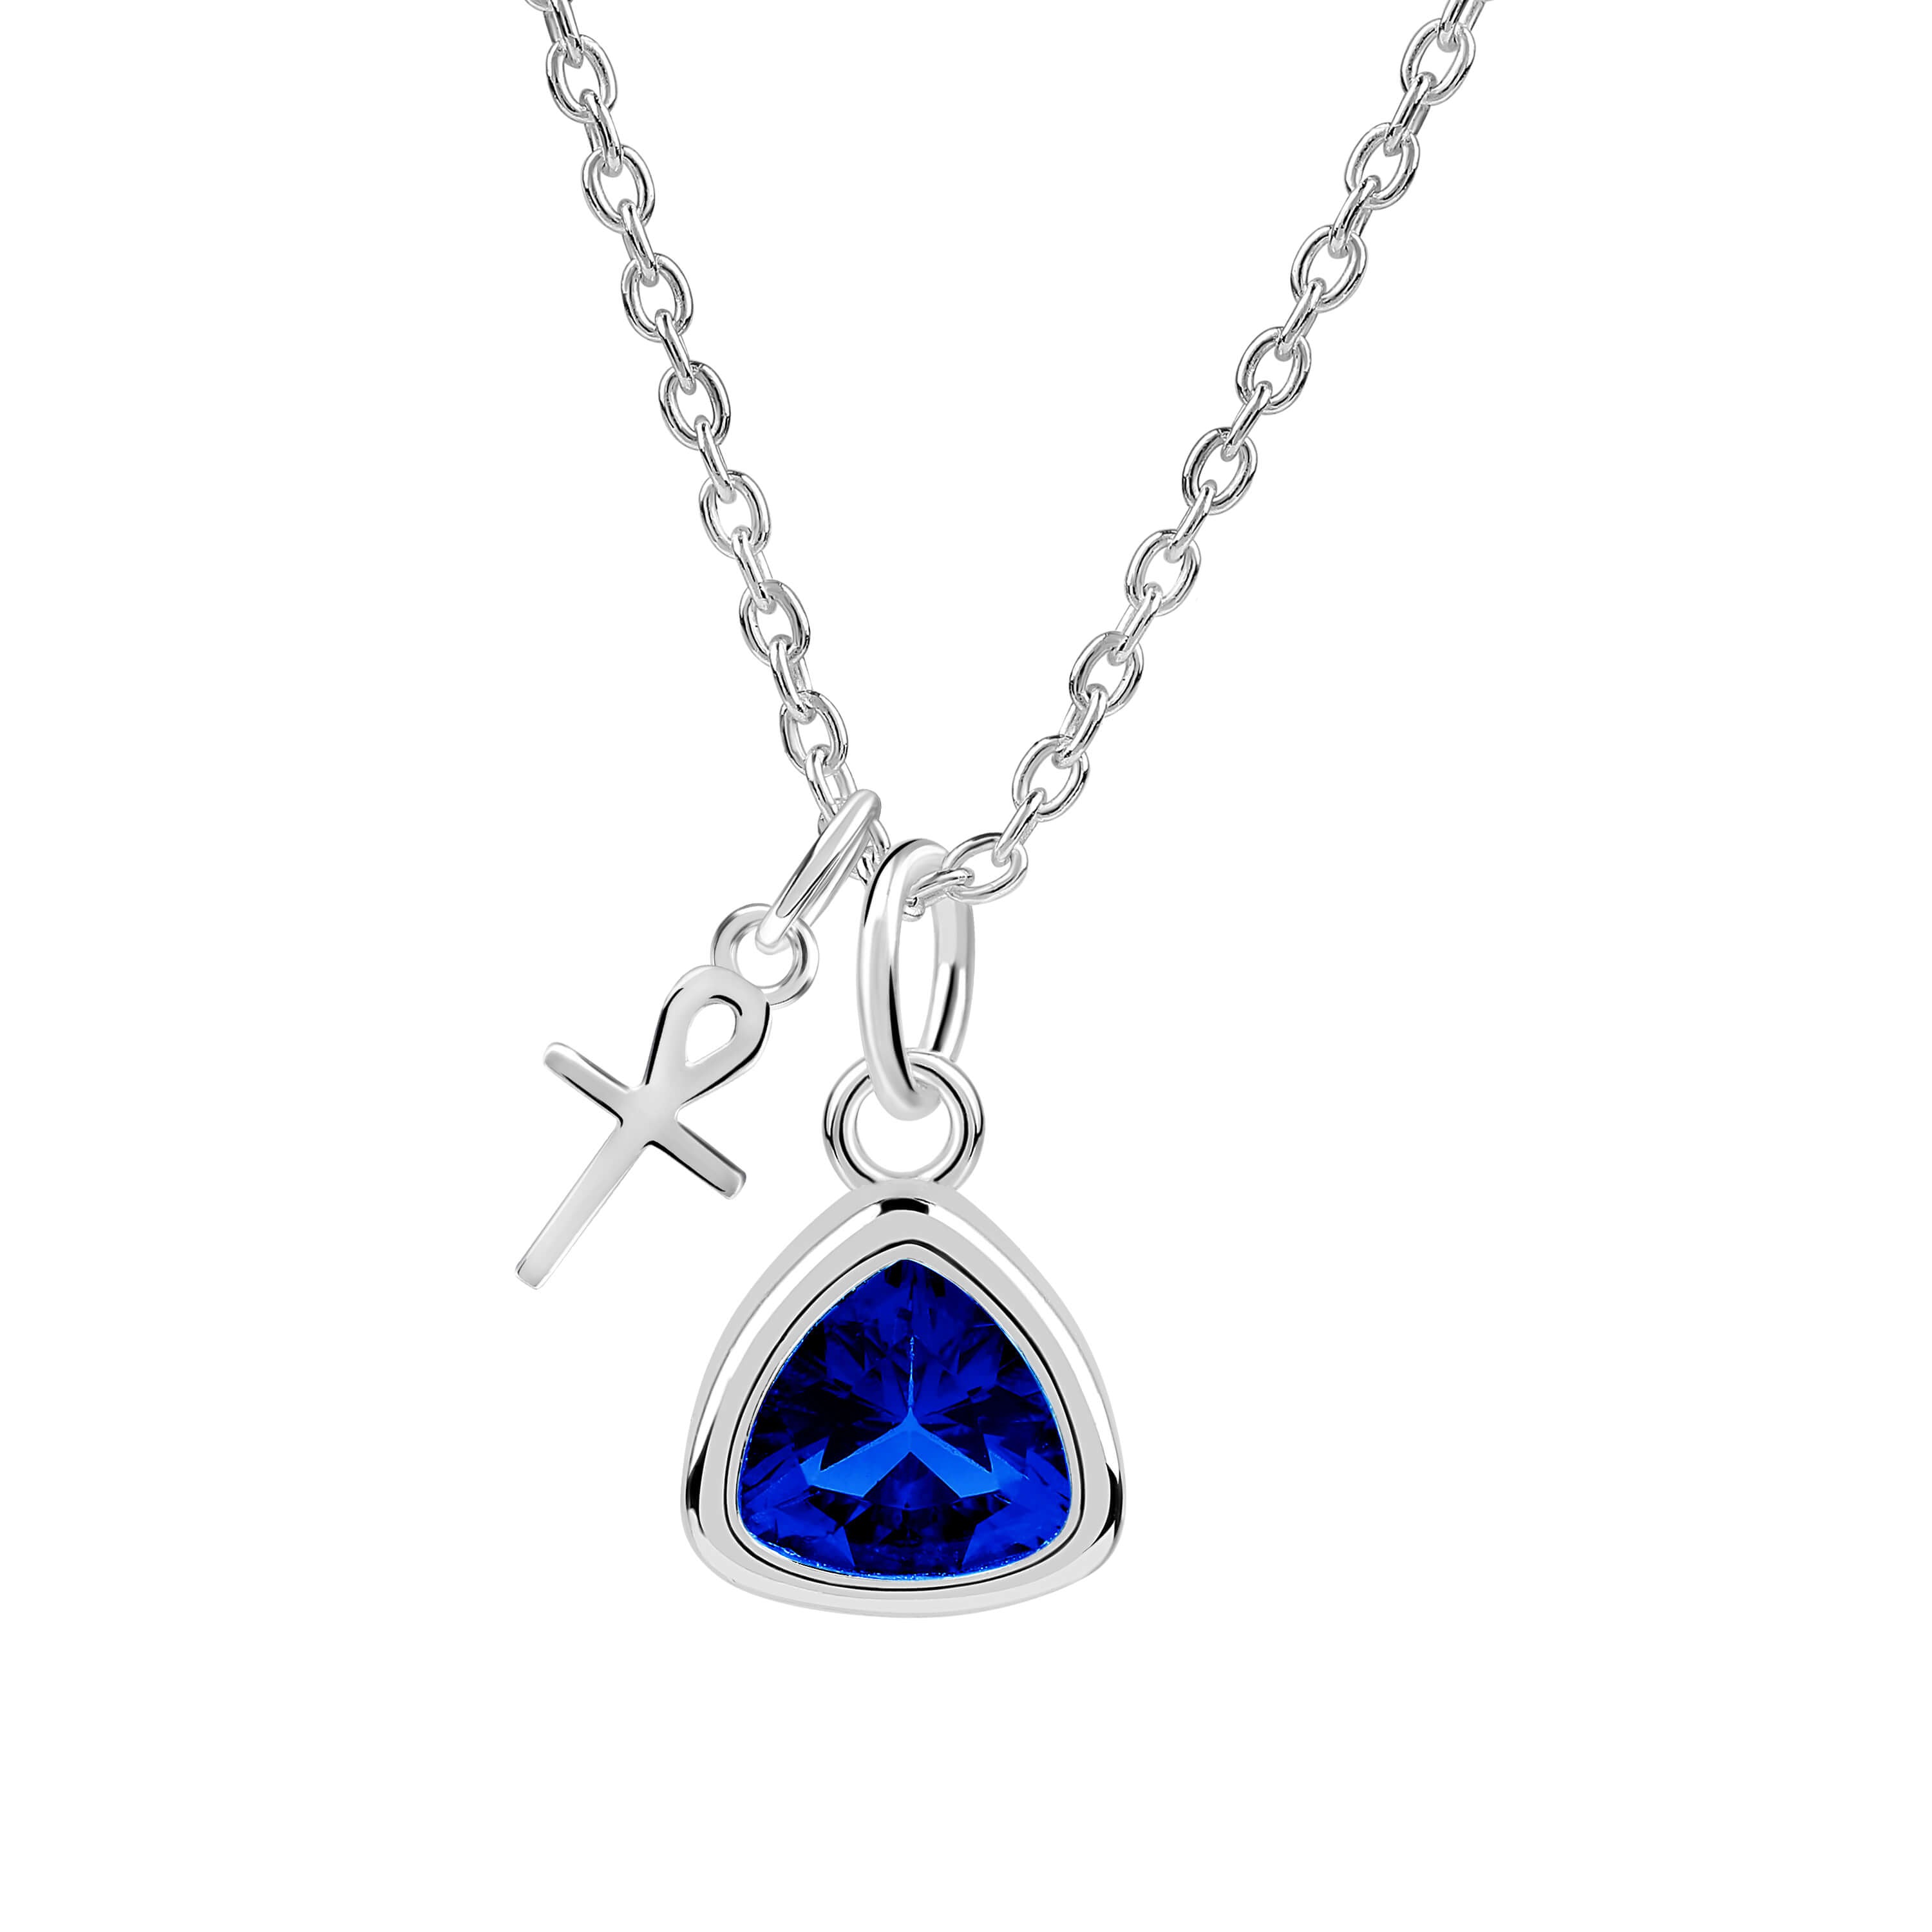 Ankh Charm with Birthstone Necklace